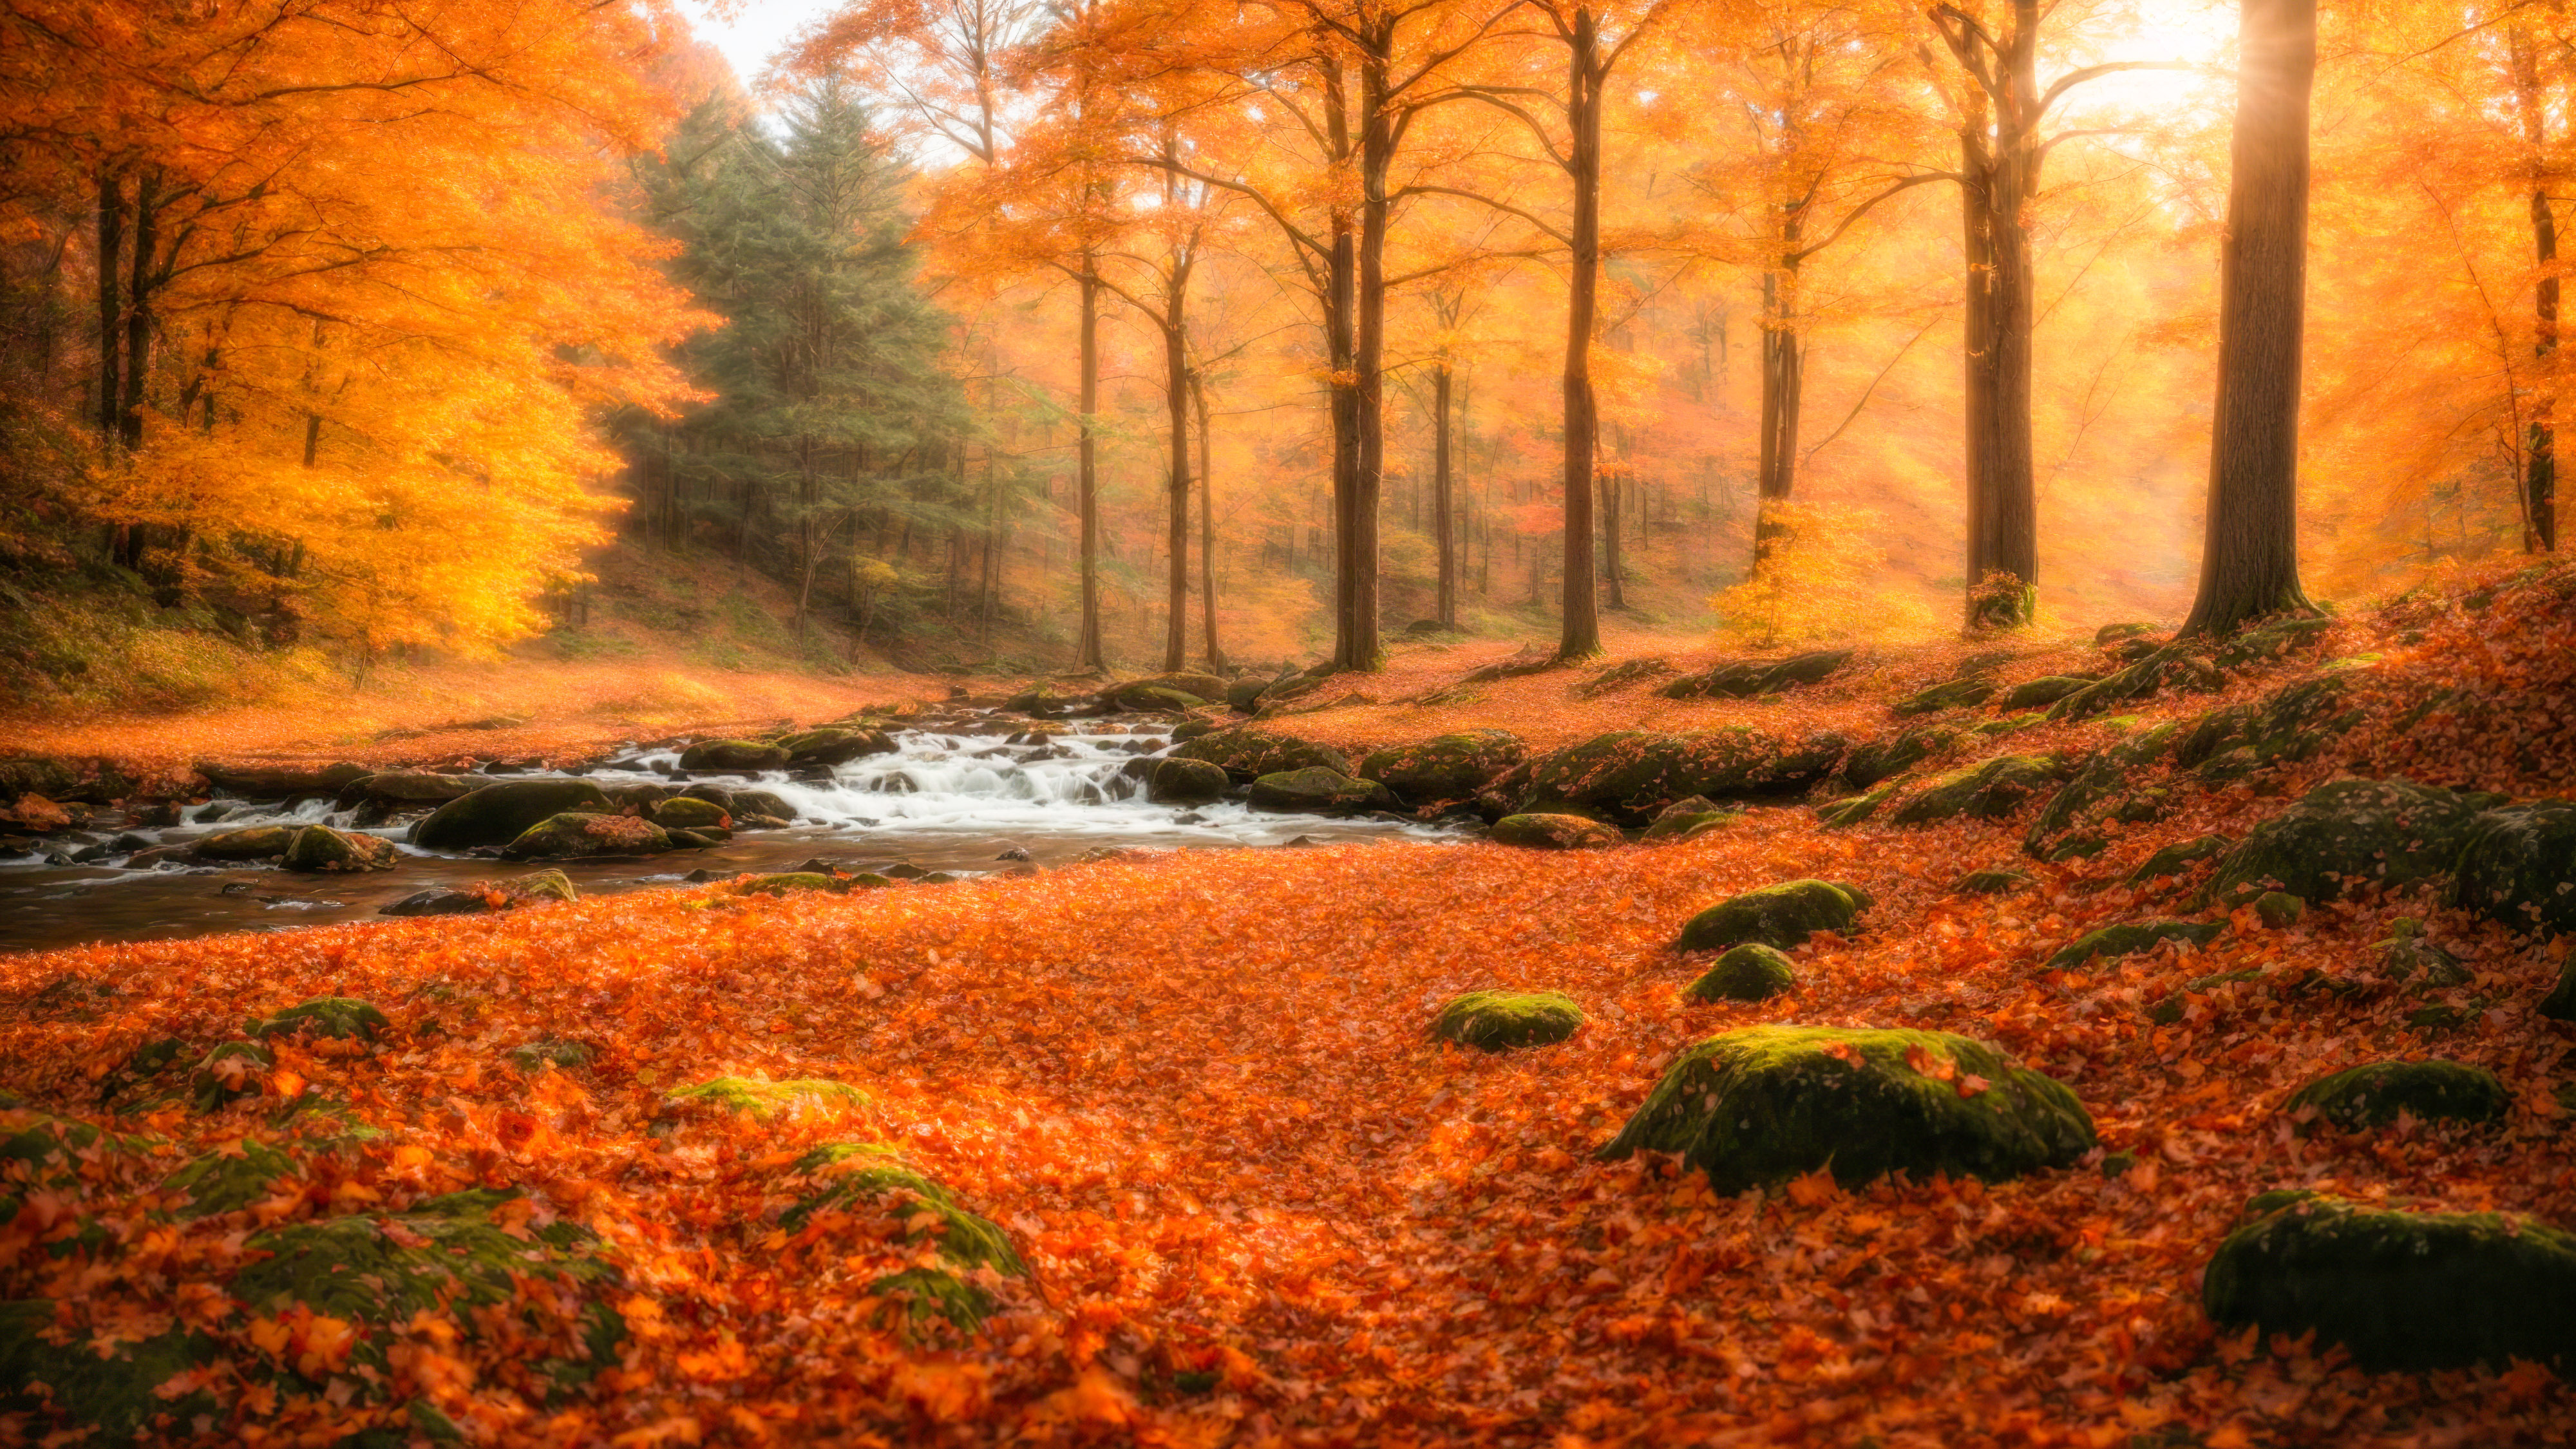 Get mesmerized with our beautiful nature wallpaper in HD, showcasing a tranquil forest scene with a winding stream, surrounded by vibrant autumn foliage, and let your screen become a window to the heart of the forest.